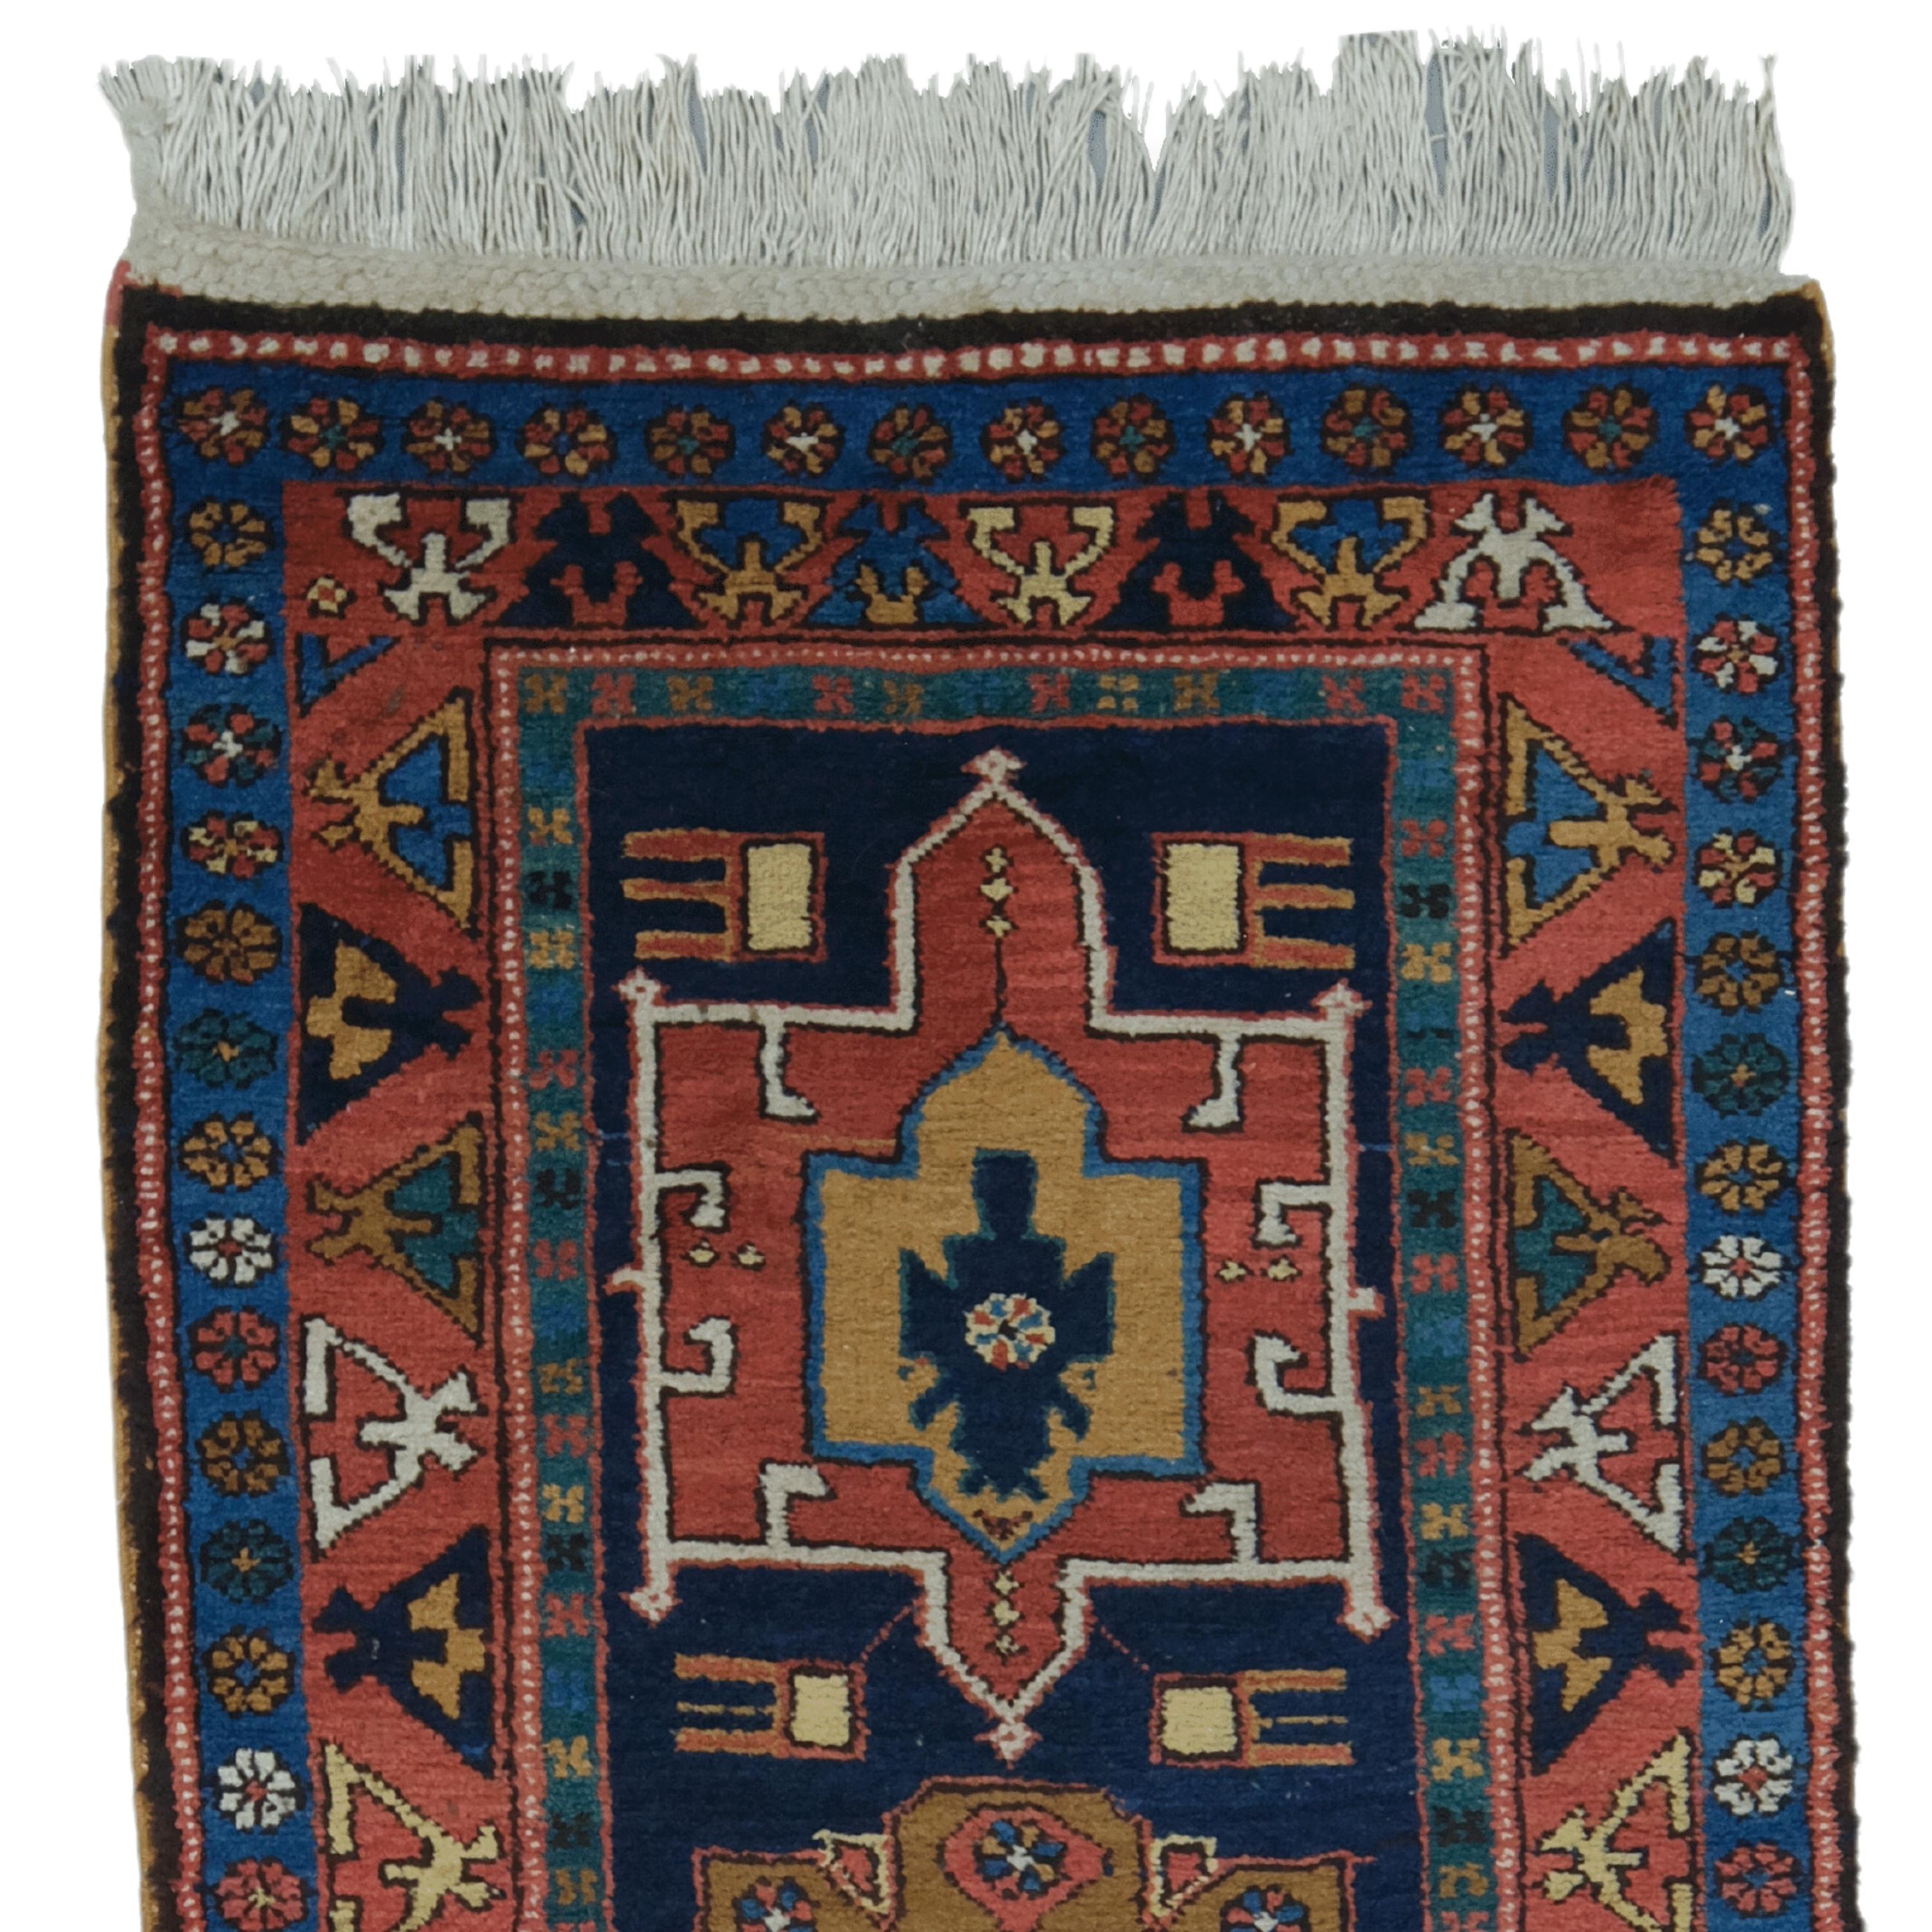 Antique Heriz Runner 92x336cm (36,2 x 132,2 In)

Heriz Runner are durable and durable and can last for generations with proper care. This is partly due to the geographical proximity of Mount Sabalan, which sits on an important copper deposit. Traces